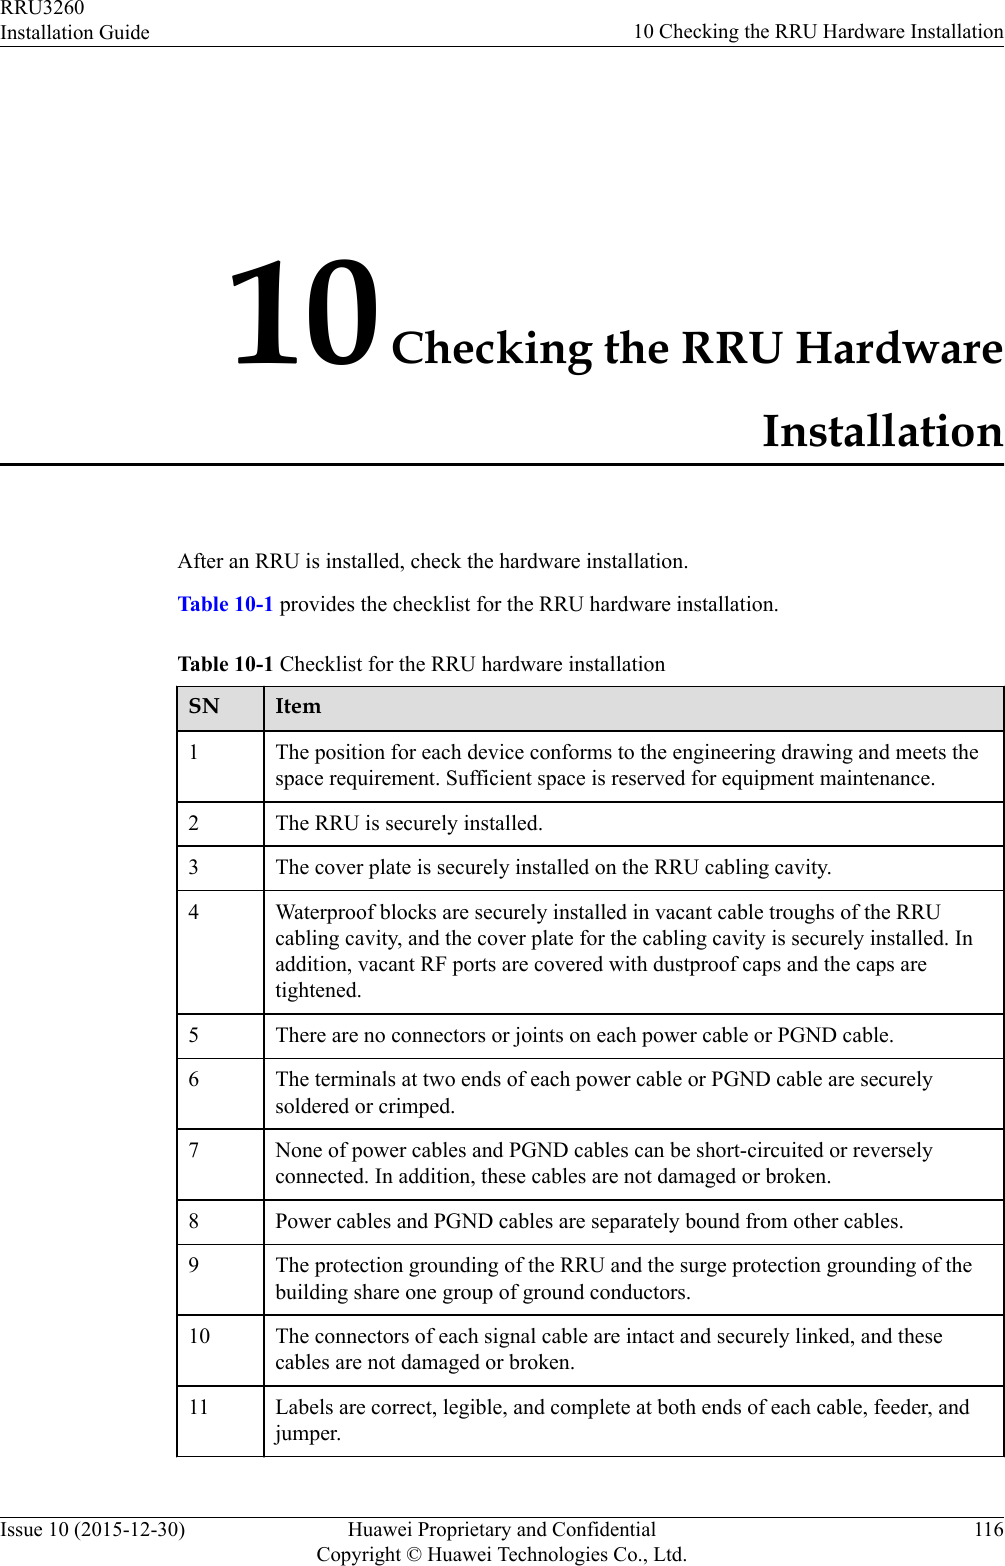 10 Checking the RRU HardwareInstallationAfter an RRU is installed, check the hardware installation.Table 10-1 provides the checklist for the RRU hardware installation.Table 10-1 Checklist for the RRU hardware installationSN Item1 The position for each device conforms to the engineering drawing and meets thespace requirement. Sufficient space is reserved for equipment maintenance.2 The RRU is securely installed.3 The cover plate is securely installed on the RRU cabling cavity.4 Waterproof blocks are securely installed in vacant cable troughs of the RRUcabling cavity, and the cover plate for the cabling cavity is securely installed. Inaddition, vacant RF ports are covered with dustproof caps and the caps aretightened.5 There are no connectors or joints on each power cable or PGND cable.6 The terminals at two ends of each power cable or PGND cable are securelysoldered or crimped.7 None of power cables and PGND cables can be short-circuited or reverselyconnected. In addition, these cables are not damaged or broken.8 Power cables and PGND cables are separately bound from other cables.9 The protection grounding of the RRU and the surge protection grounding of thebuilding share one group of ground conductors.10 The connectors of each signal cable are intact and securely linked, and thesecables are not damaged or broken.11 Labels are correct, legible, and complete at both ends of each cable, feeder, andjumper.RRU3260Installation Guide 10 Checking the RRU Hardware InstallationIssue 10 (2015-12-30) Huawei Proprietary and ConfidentialCopyright © Huawei Technologies Co., Ltd.116